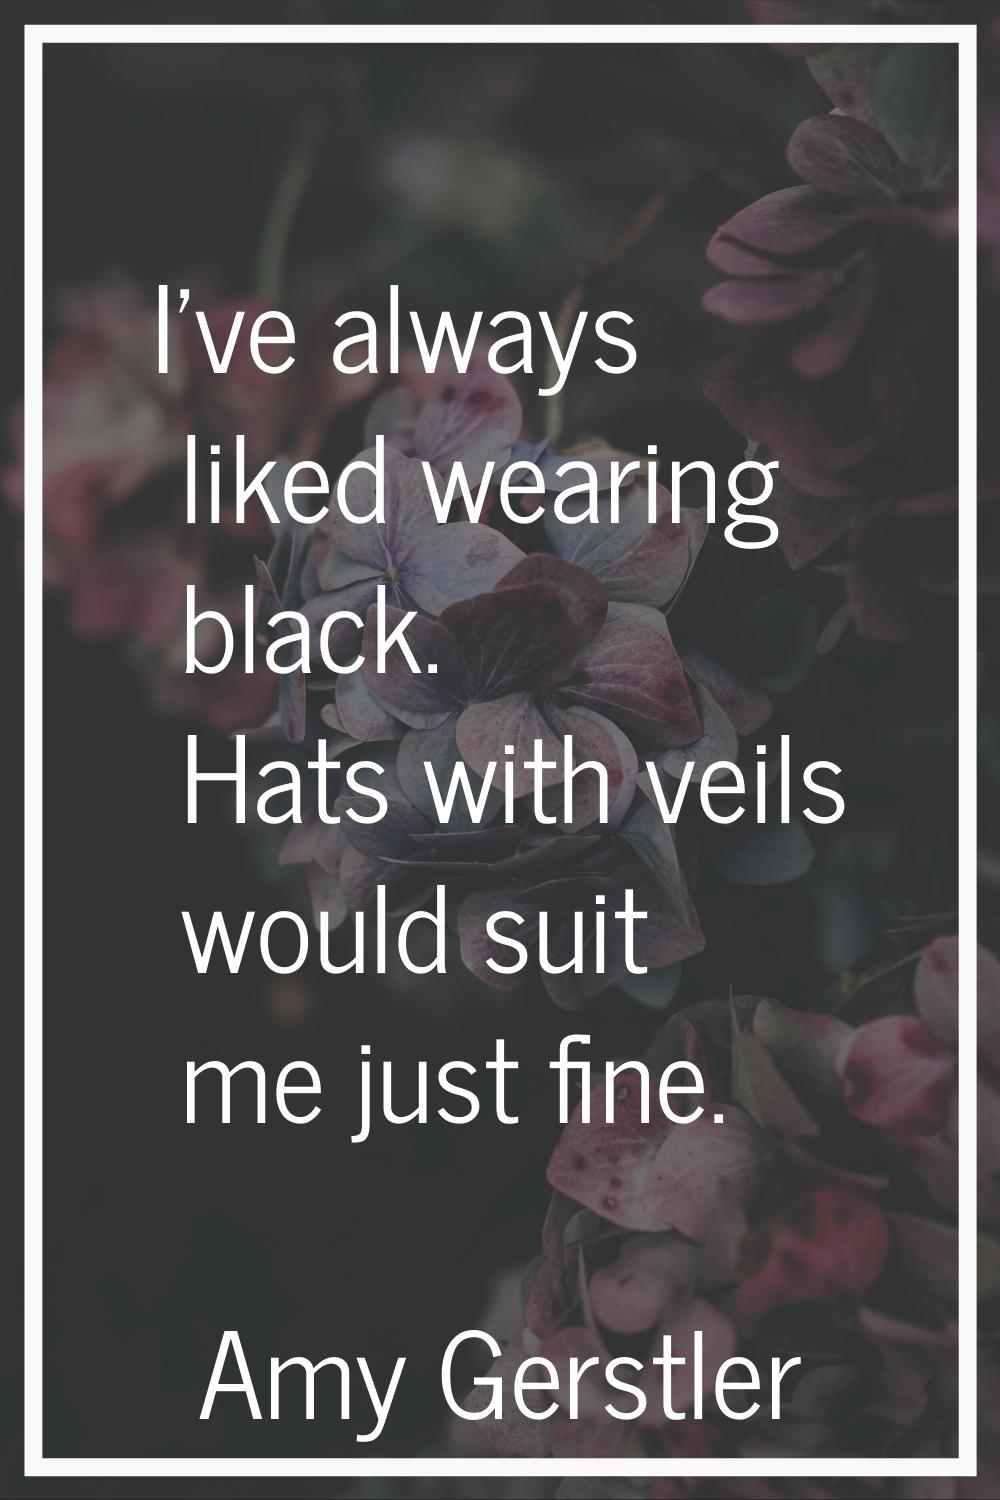 I've always liked wearing black. Hats with veils would suit me just fine.